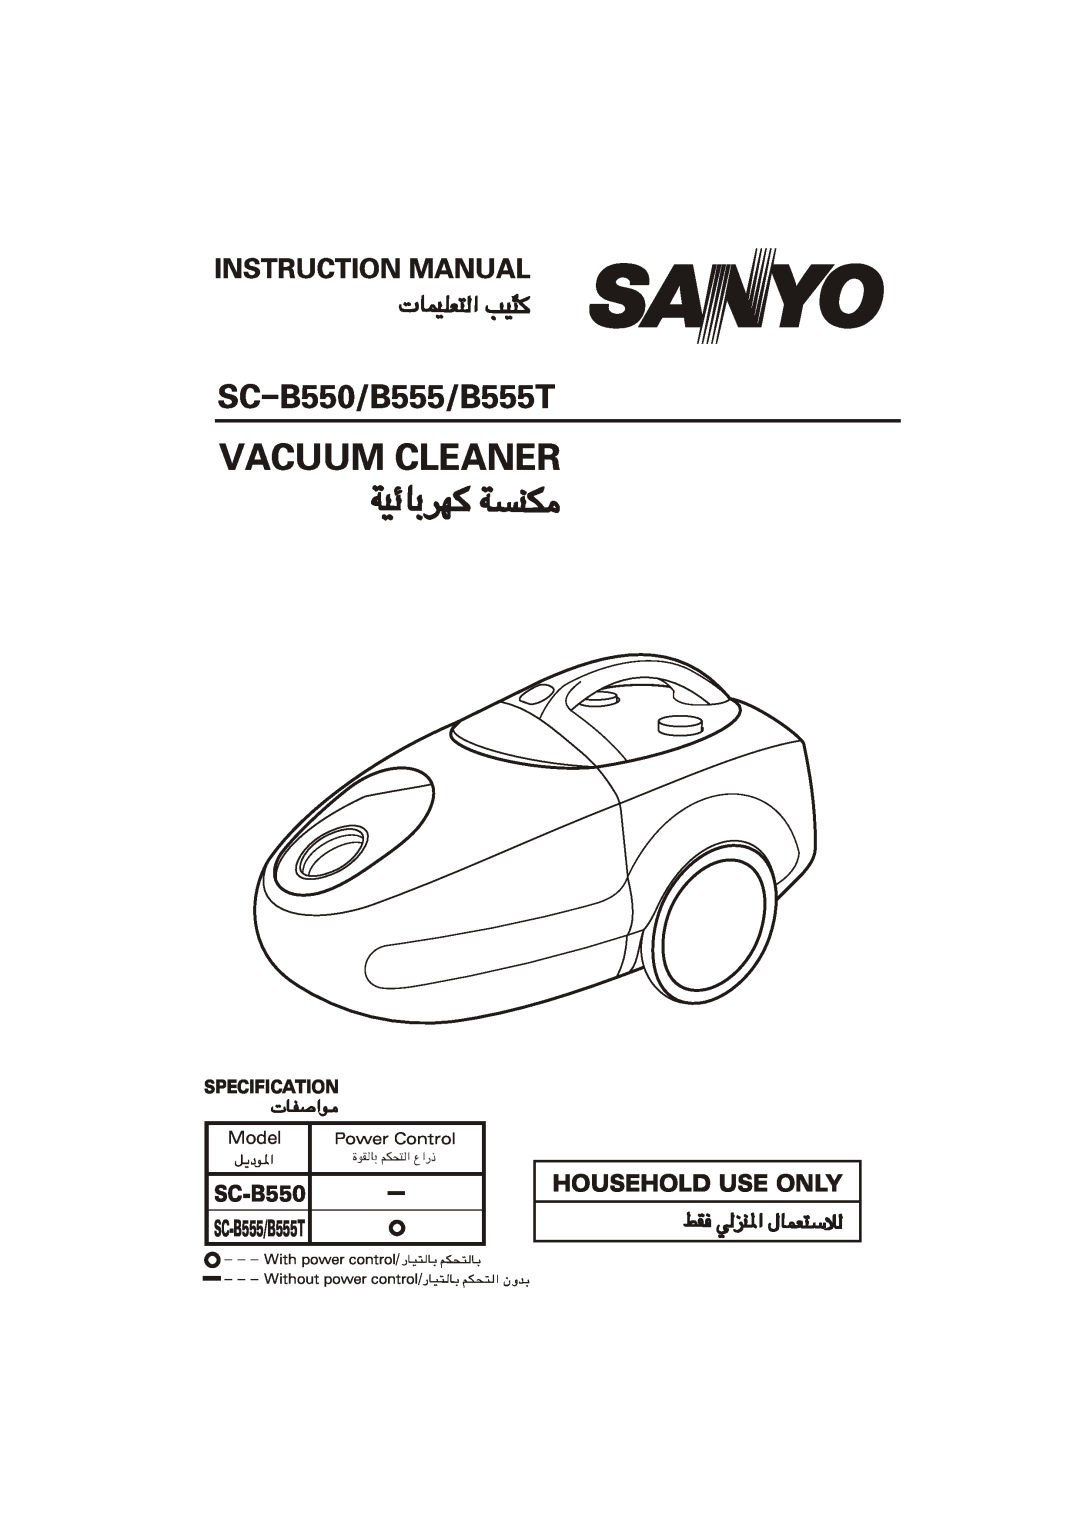 Sanyo SC-B555T manual Household Use Only, SC-B550 SC-B555/B555T, Specification 